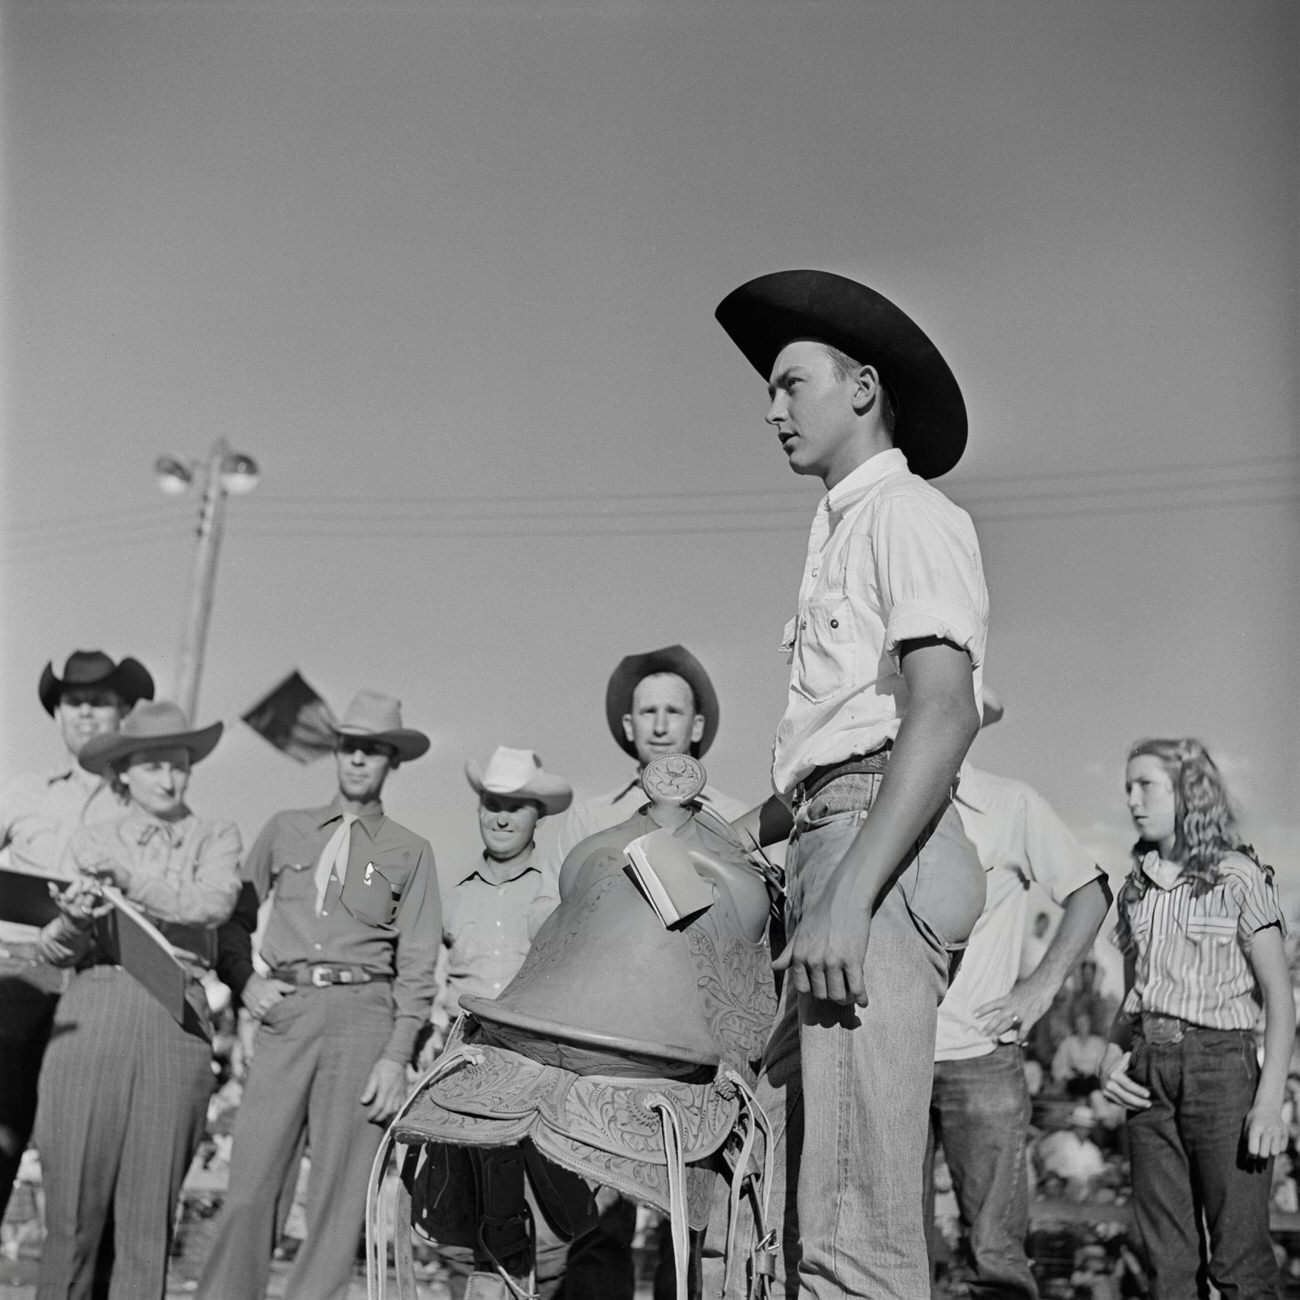 A competitor holding his saddle at a youth rodeo in Houston, Texas, with other competitors and judges in the background, 1952.